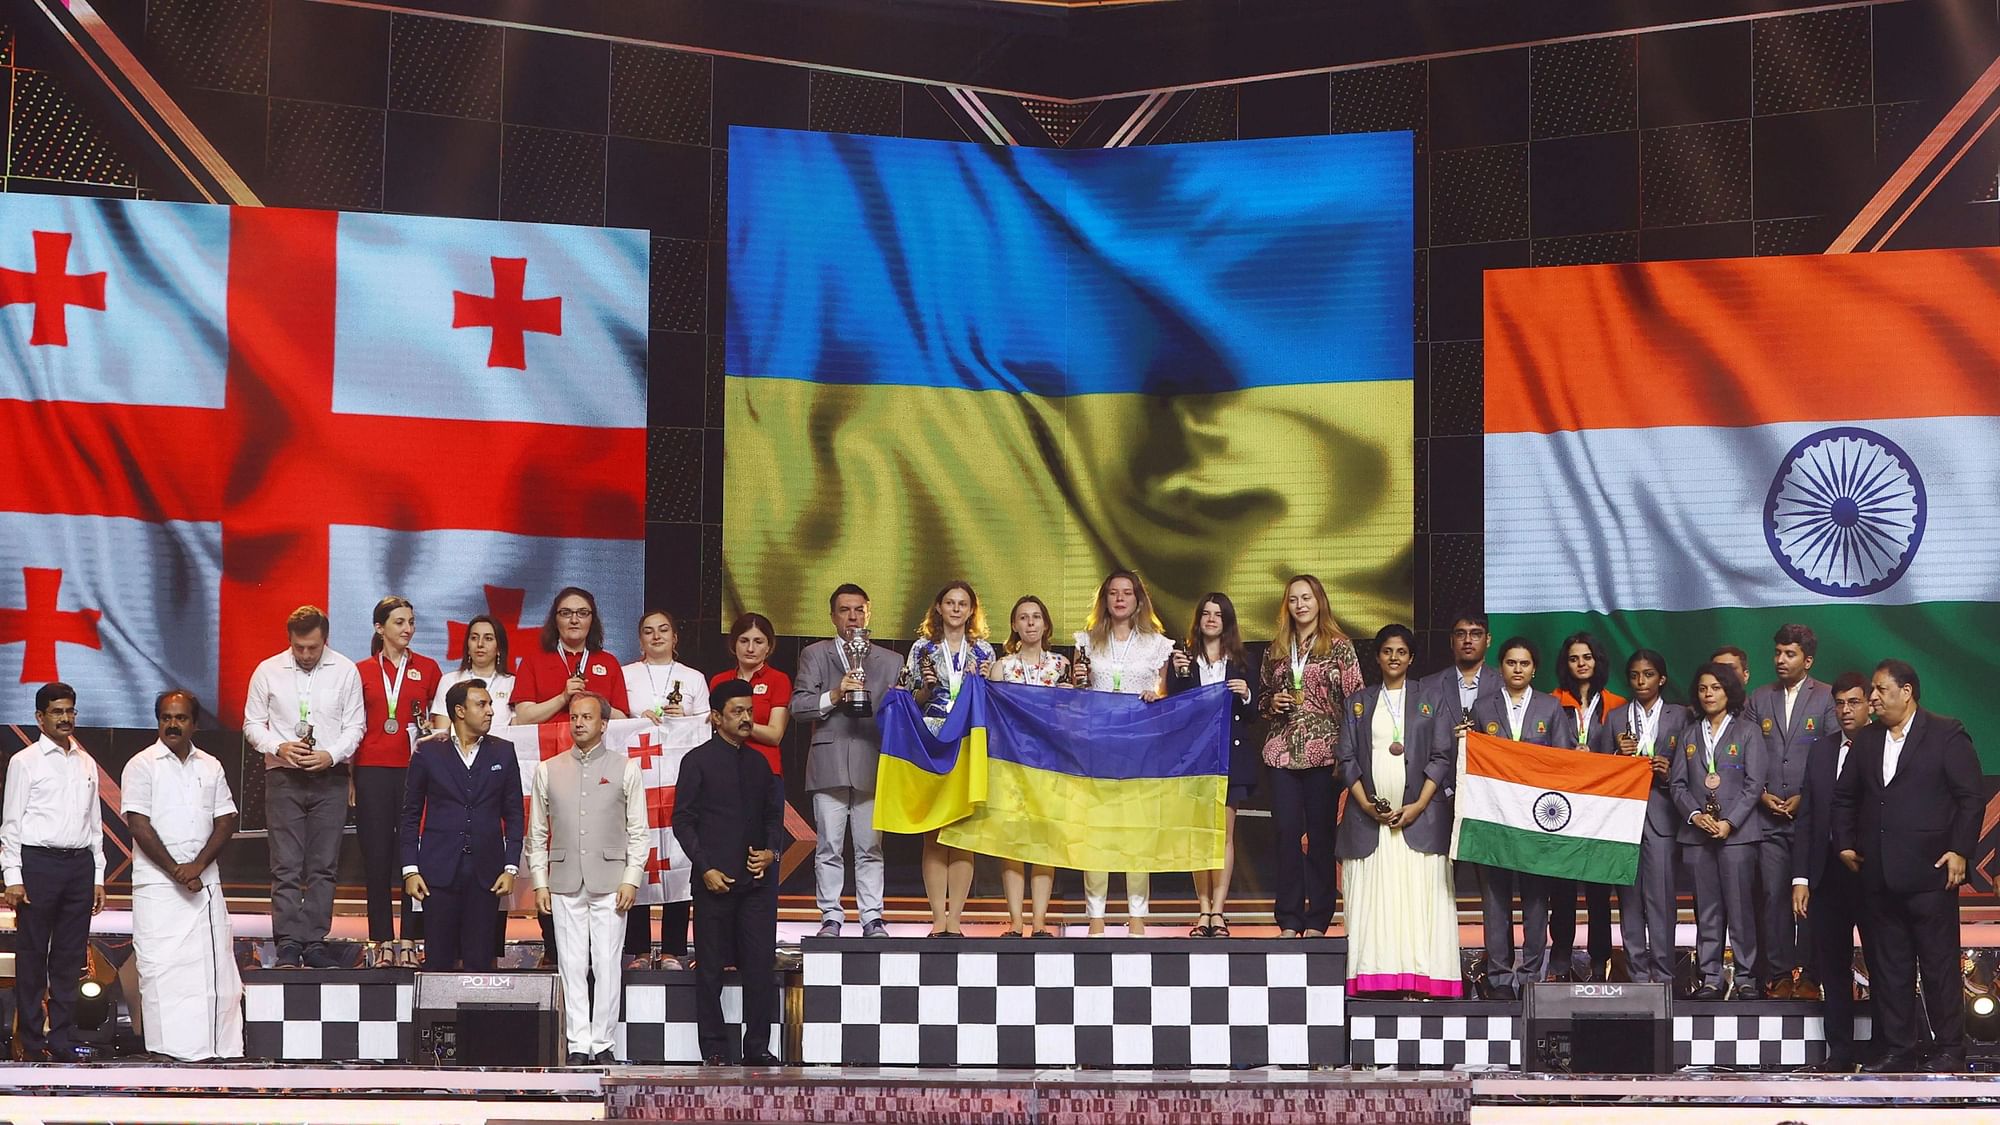 <div class="paragraphs"><p>Women's section bronze medallists India A team (right) with gold medallists Ukraine and silver medallists Georgia during the closing ceremony of the 44th Chess Olympiad in Chennai.&nbsp;</p></div>